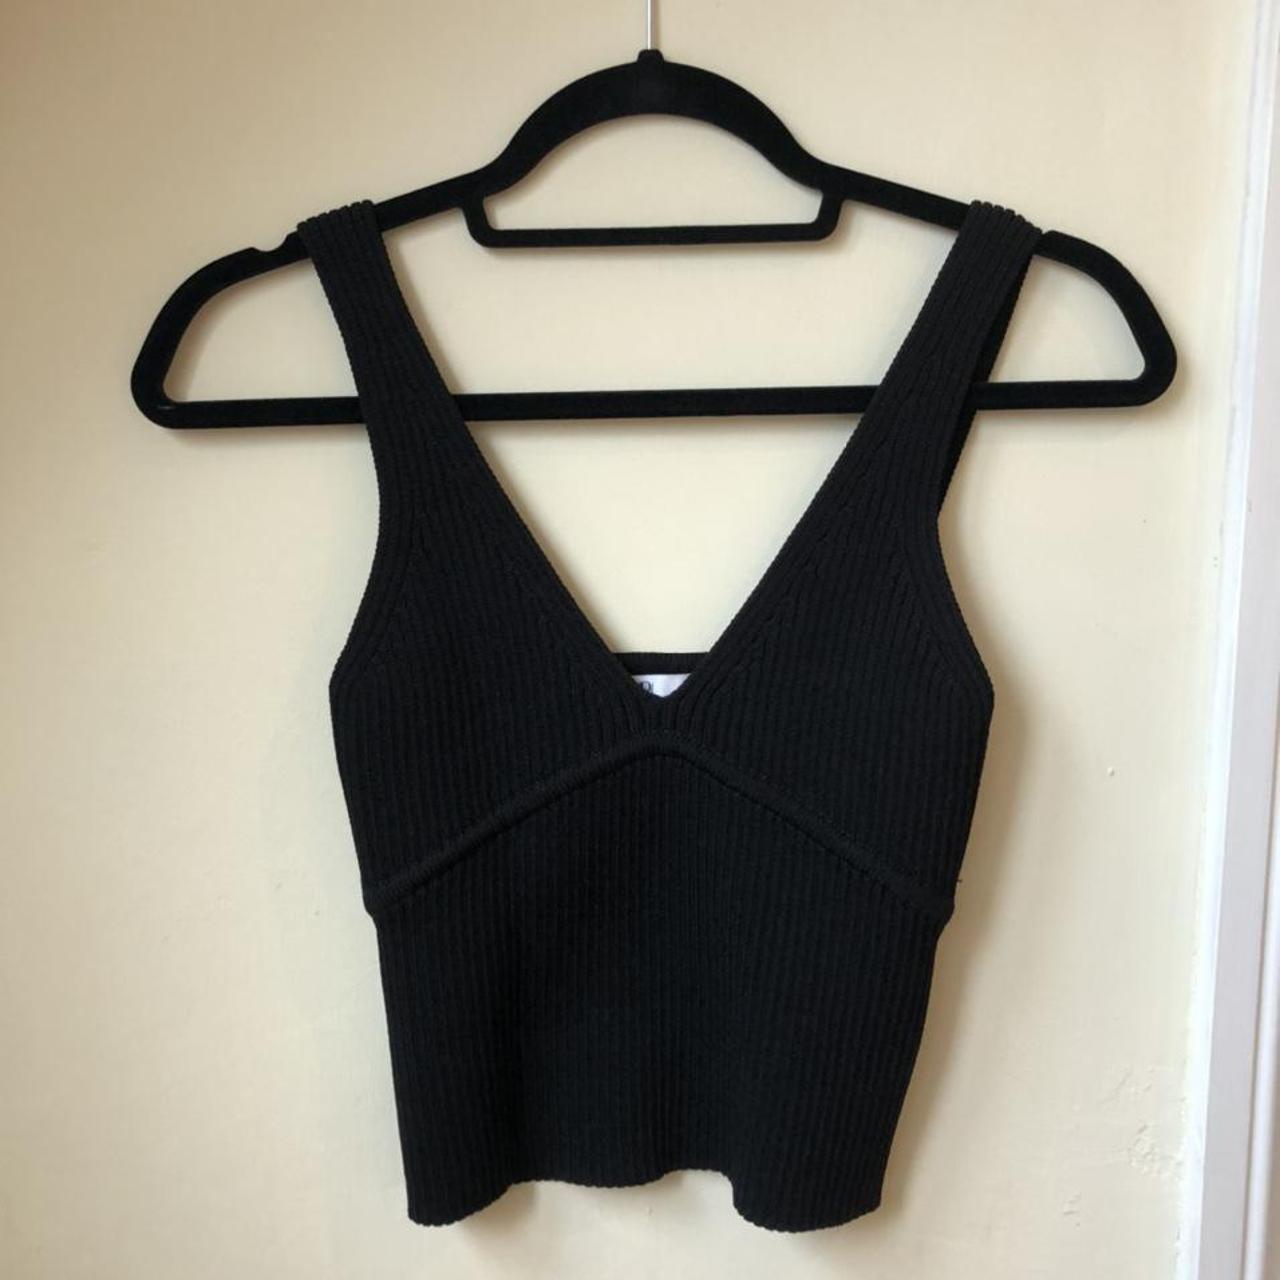 Product Image 1 - Ribbed, fitted black top with